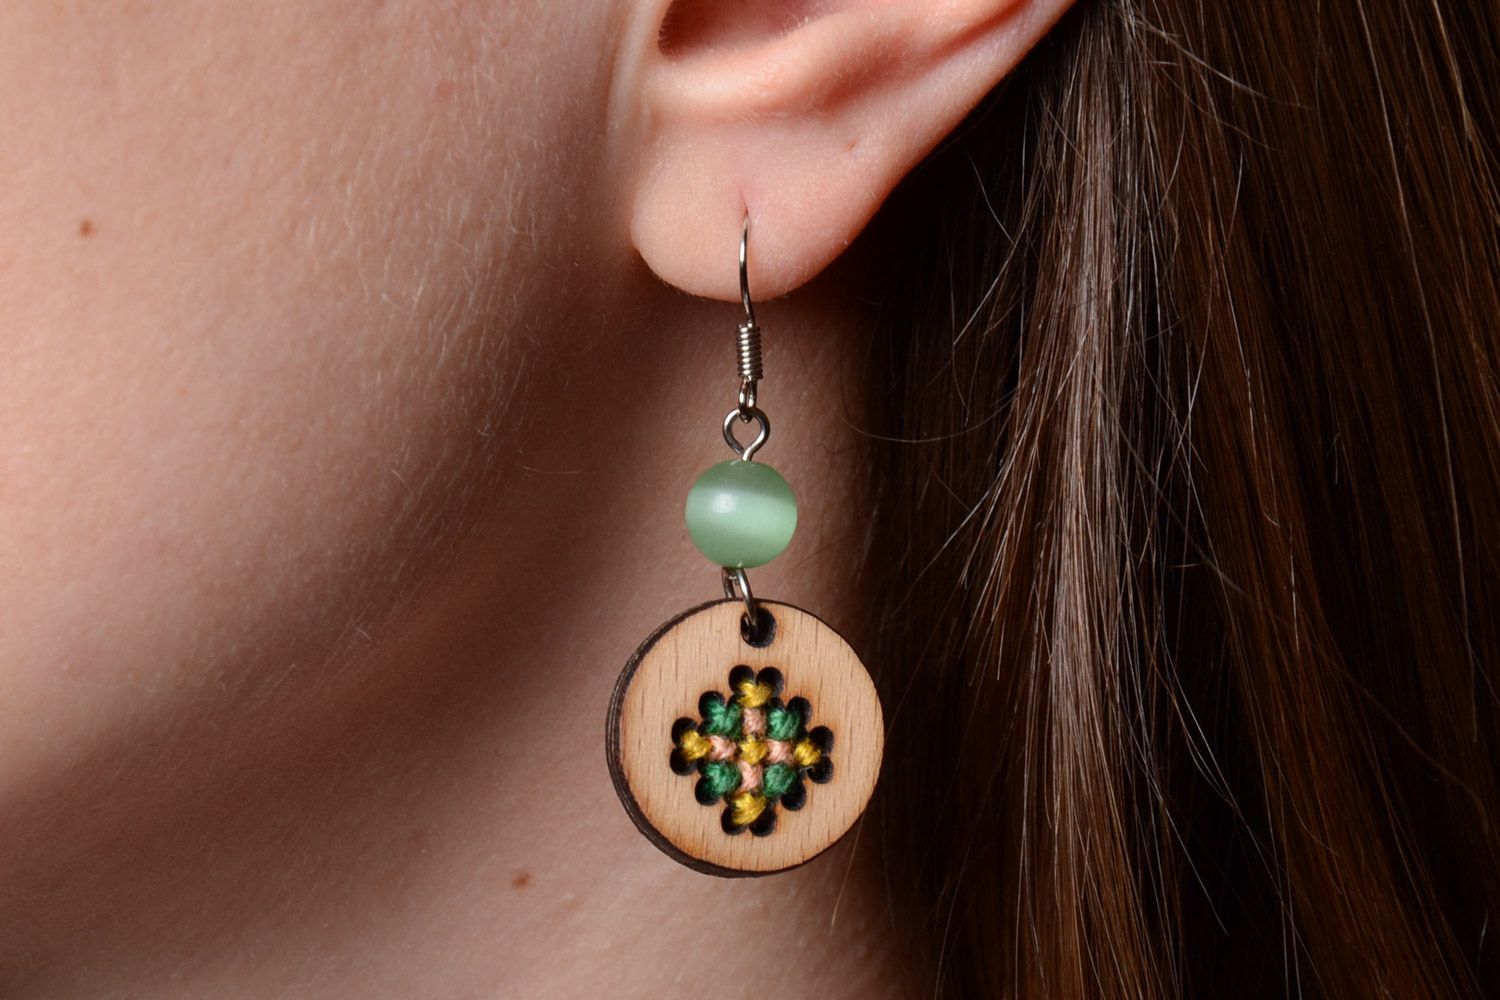 Handmade plywood earrings with cross stitch embroidery and beads in ethnic style photo 5